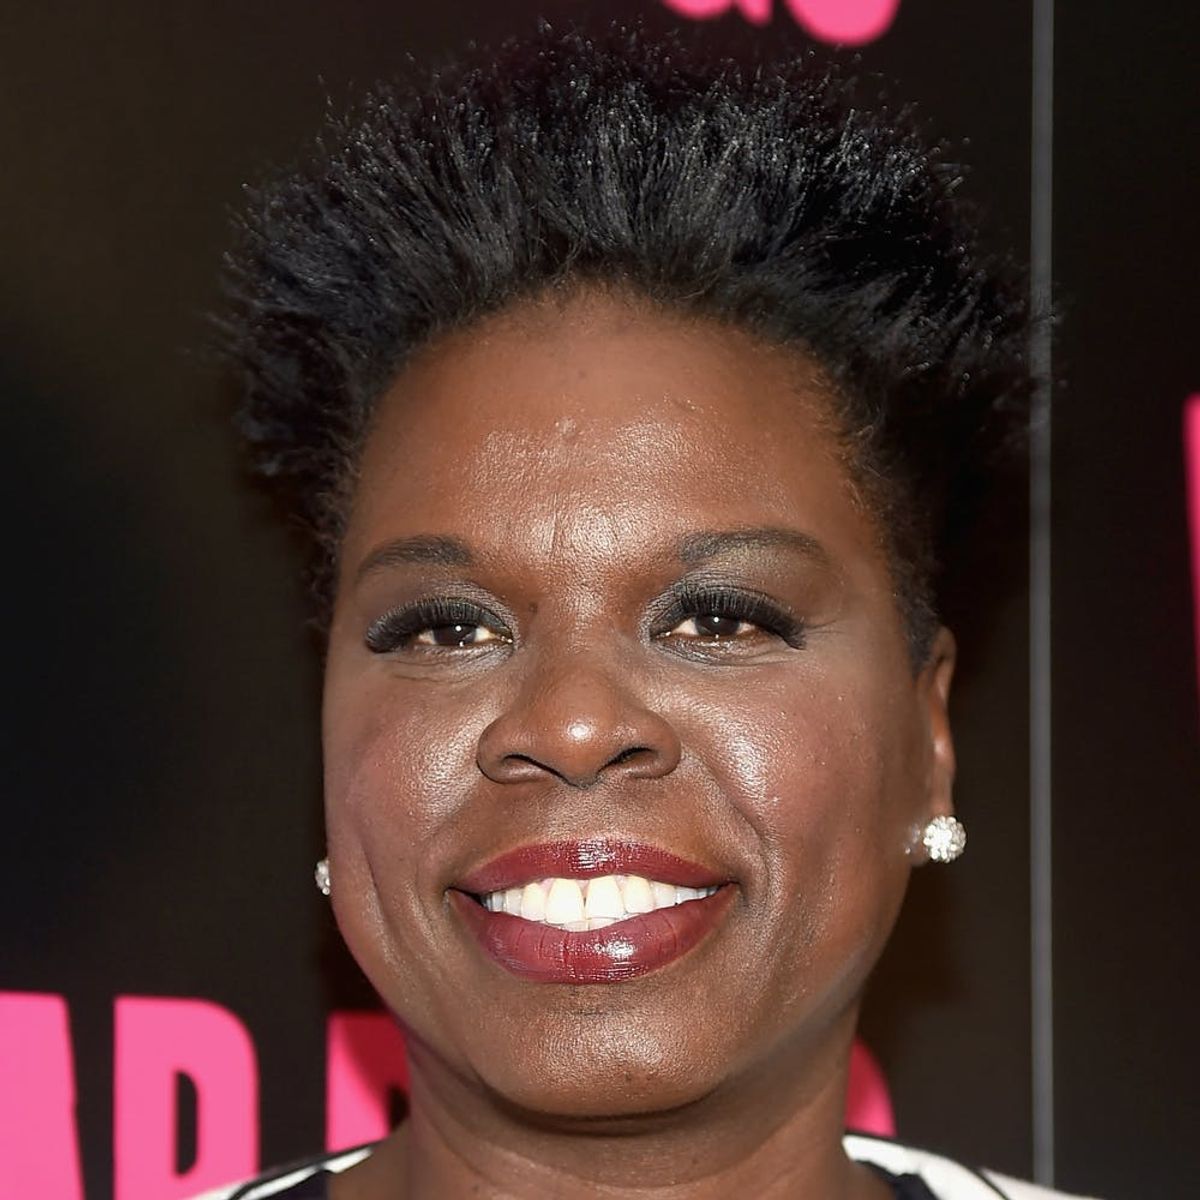 See What Prompted Leslie Jones to Get Back Online Following Her Web Attack